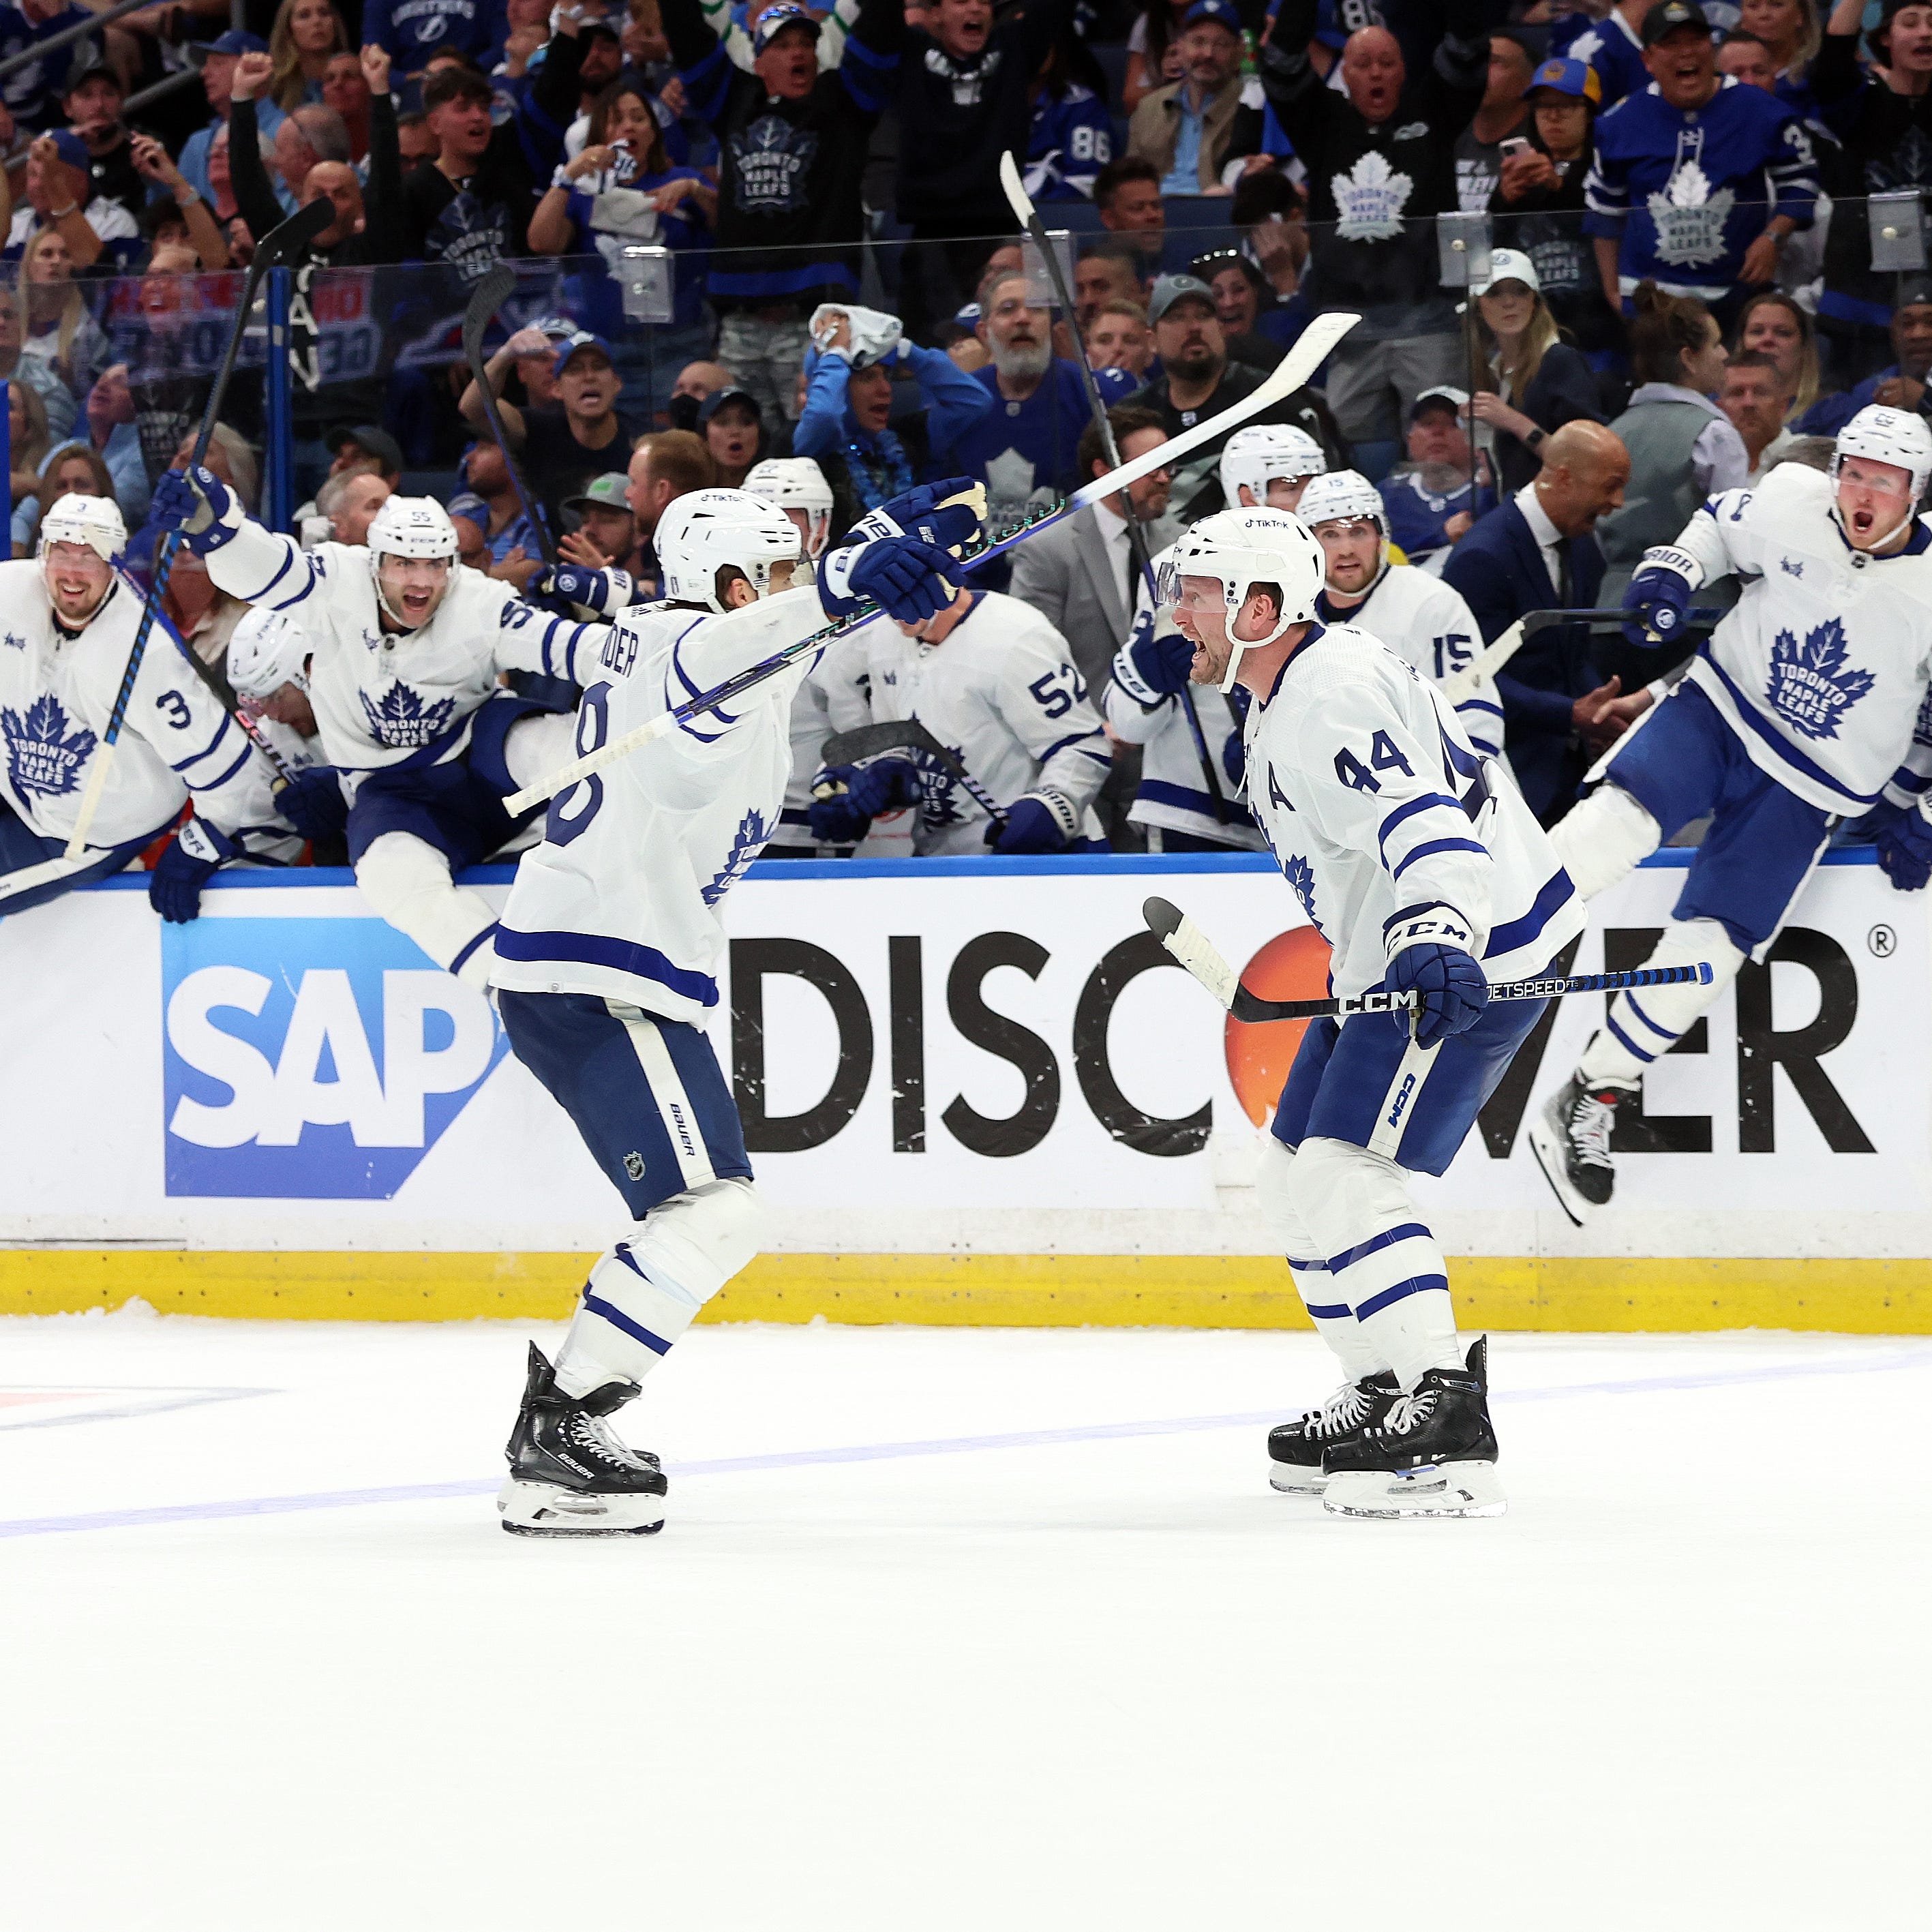 Toronto Maple Leafs defenseman Morgan Rielly (44) is congratulated by teammates after his overtime goal.